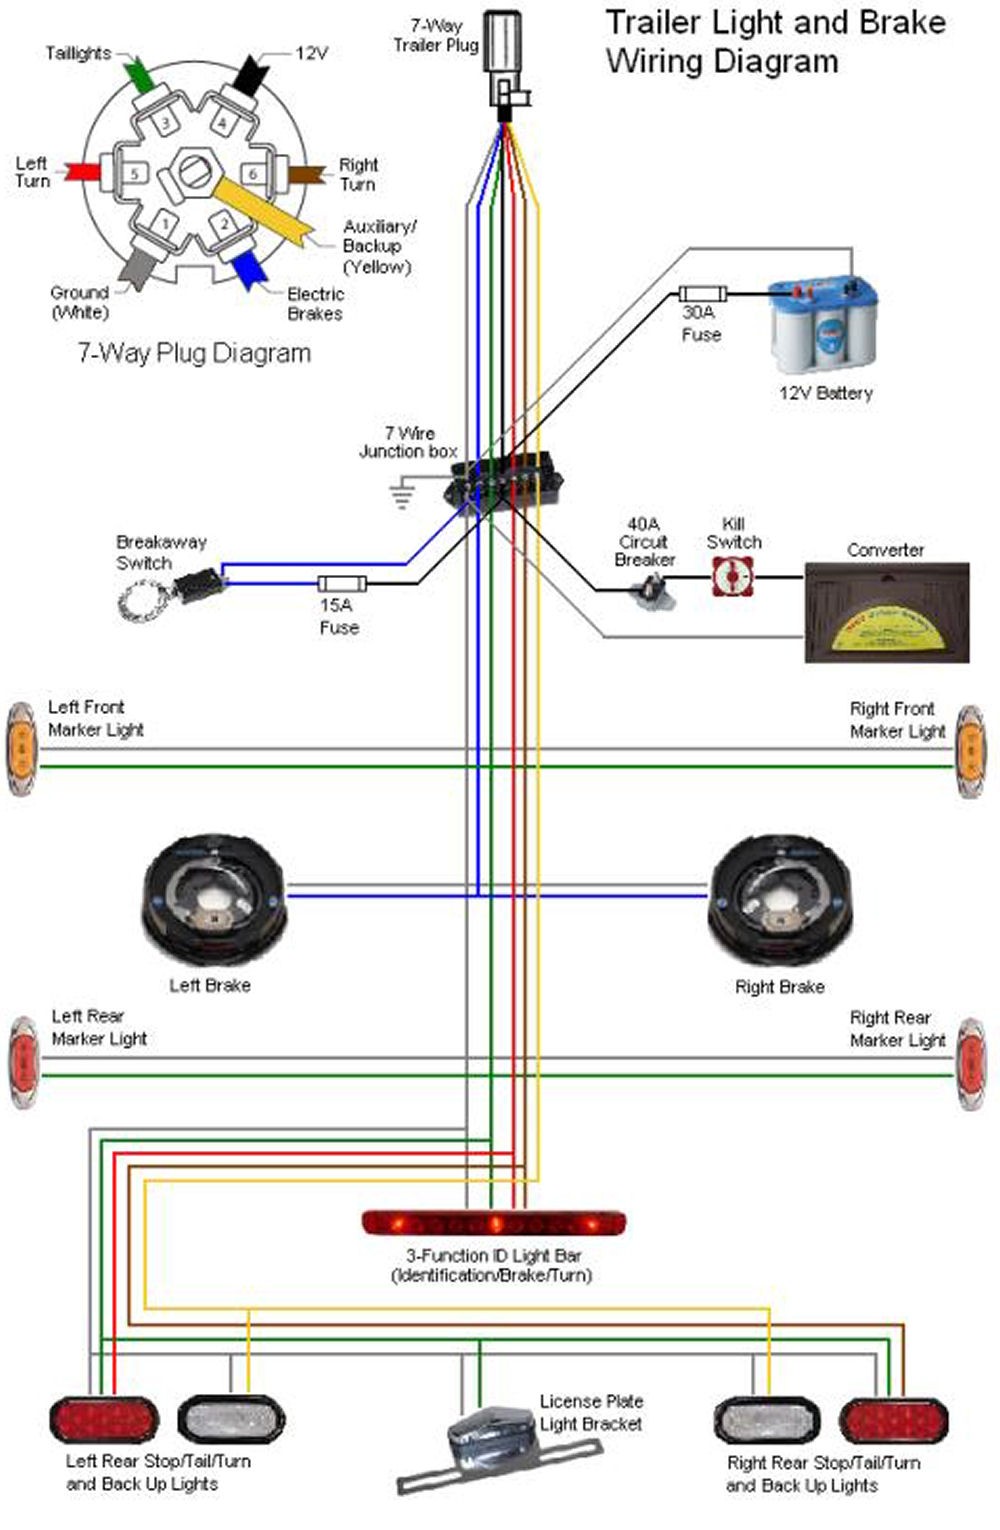 New 7Way Trailer Wiring Diagram 21 About Remodel The12volt Endearing Enchanting 7 Way